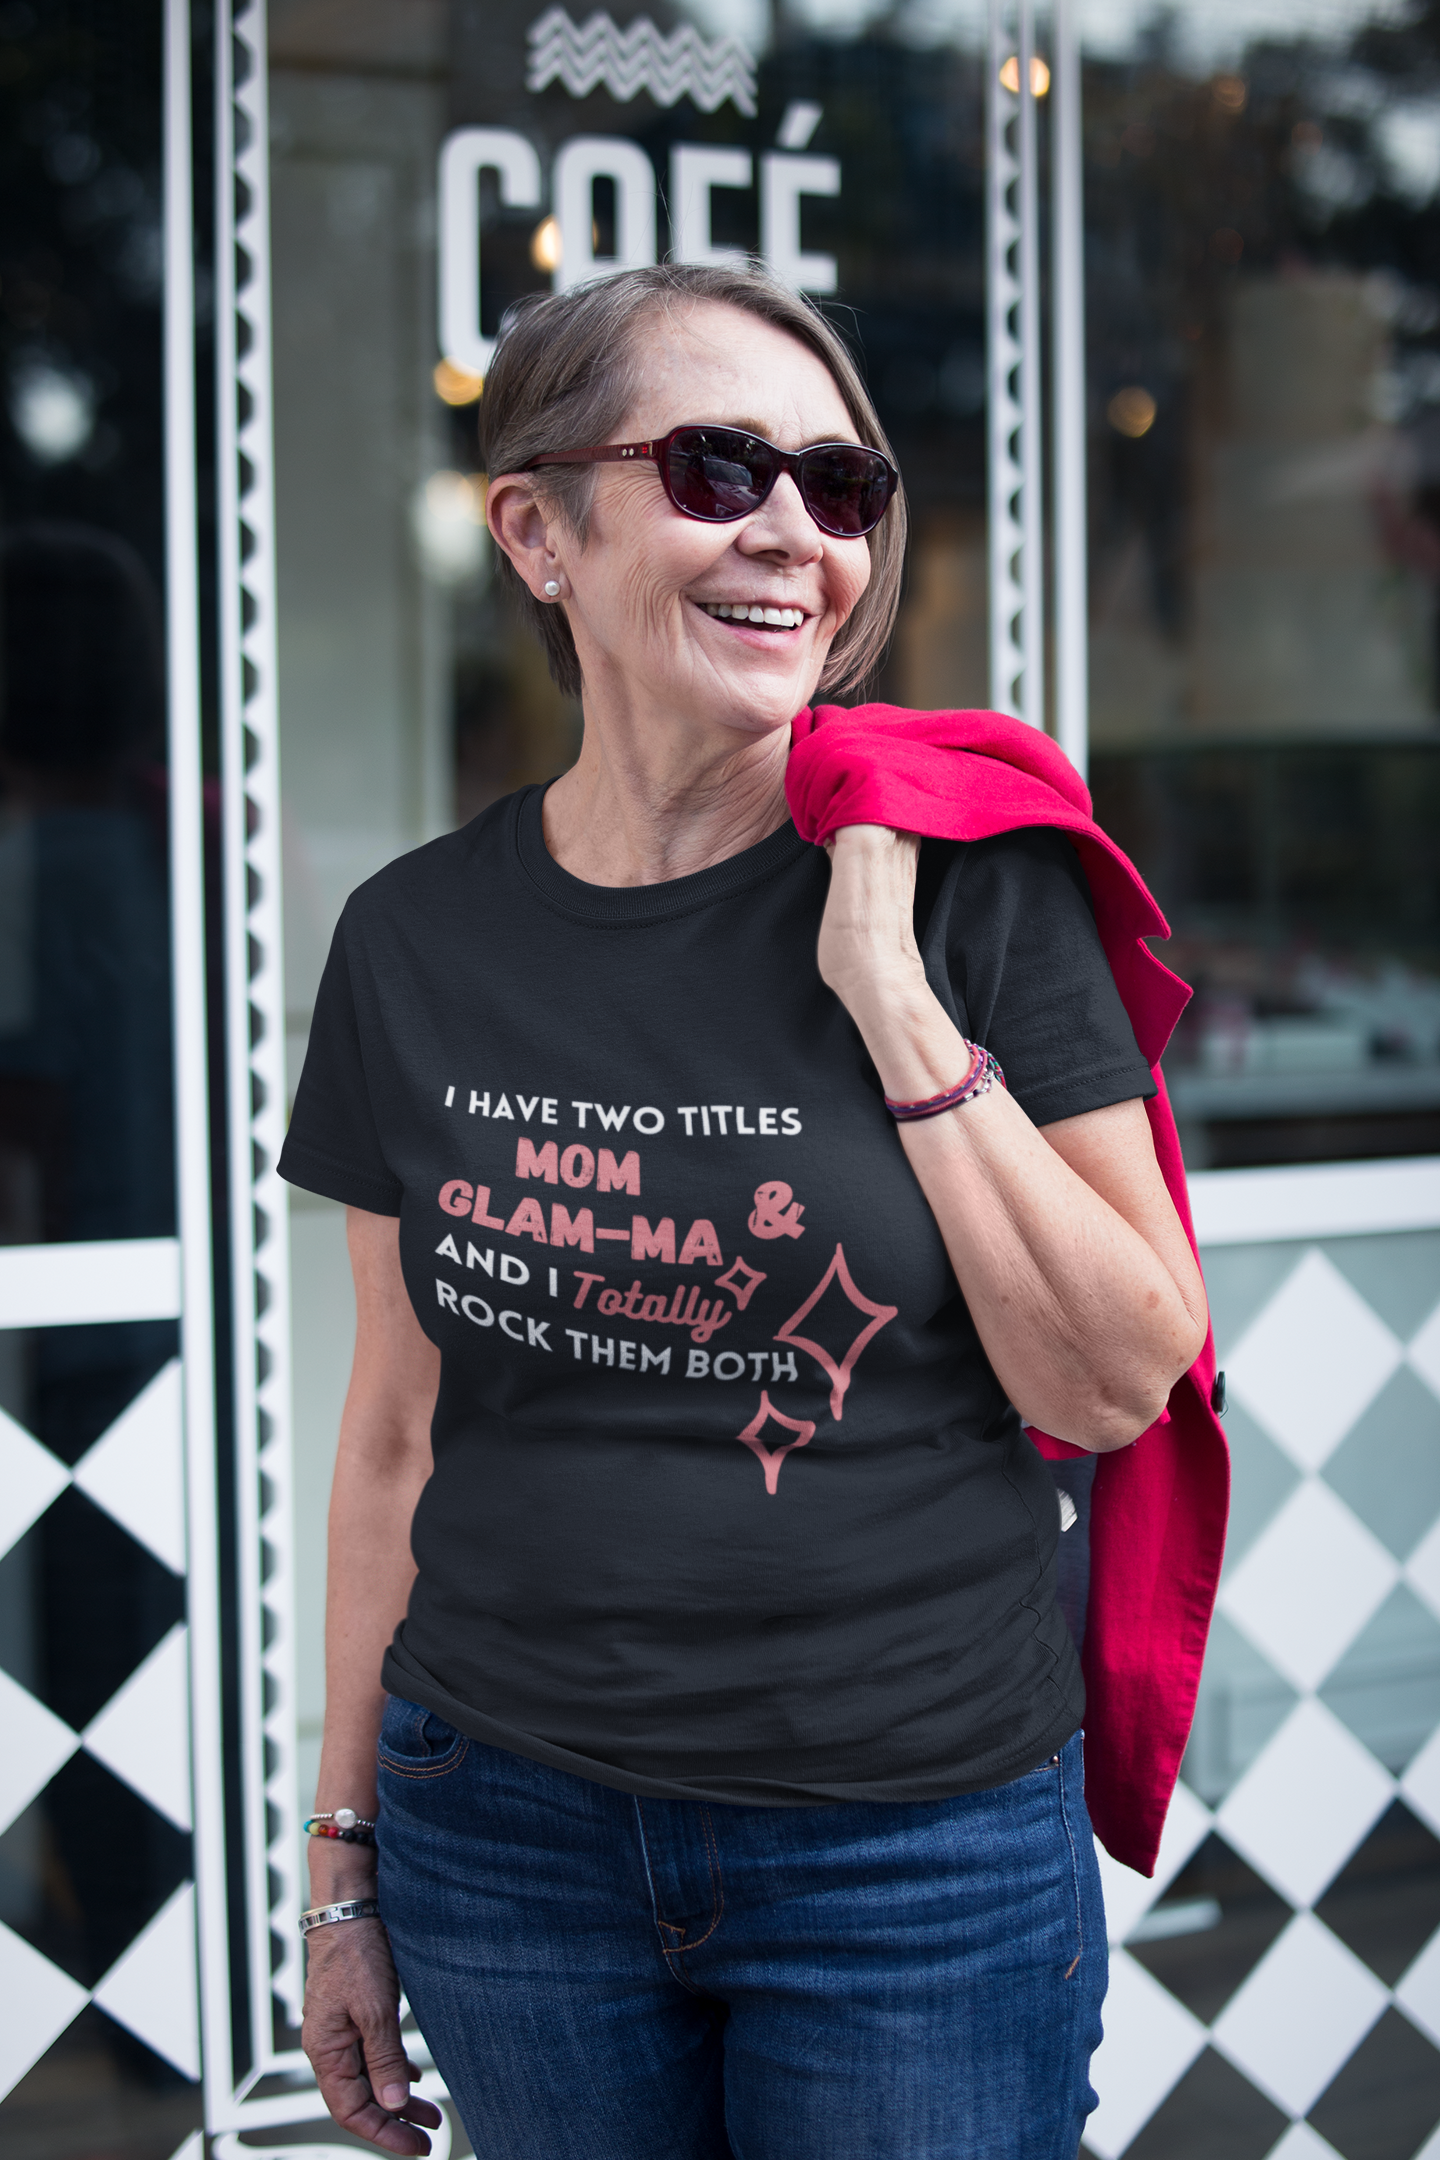 I-Have-Two-Titles-Mom-&-Glam-ma-and-I-Totally-Rock-Them-Both-T-shirt